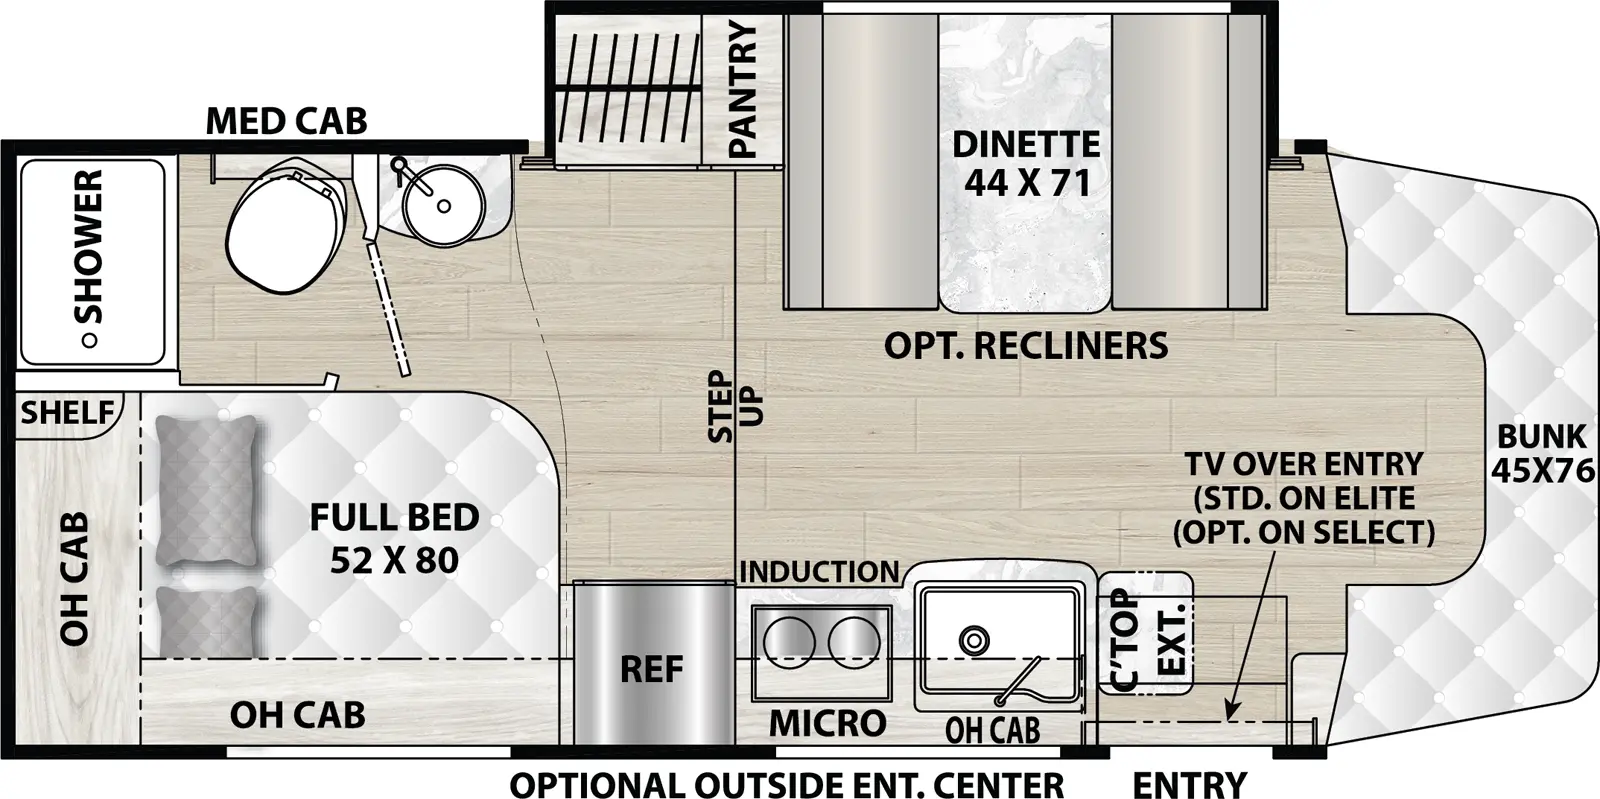 The 24CB has one slideout and one entry. Exterior features an optional outside entertainment center. Interior layout front to back: front cab with bunk above, off-door side slideout with dinette (optional recliners), and pantry; door side entry, TV above entry (standard on Elite, optional on select), kitchen counter with extension, sink, overhead cabinet, microwave, induction cooktop, and refrigerator; step up to rear off-door side bathroom sink, and separate room with toilet and shower, and door side full bed with overhead cabinet and a shelf.